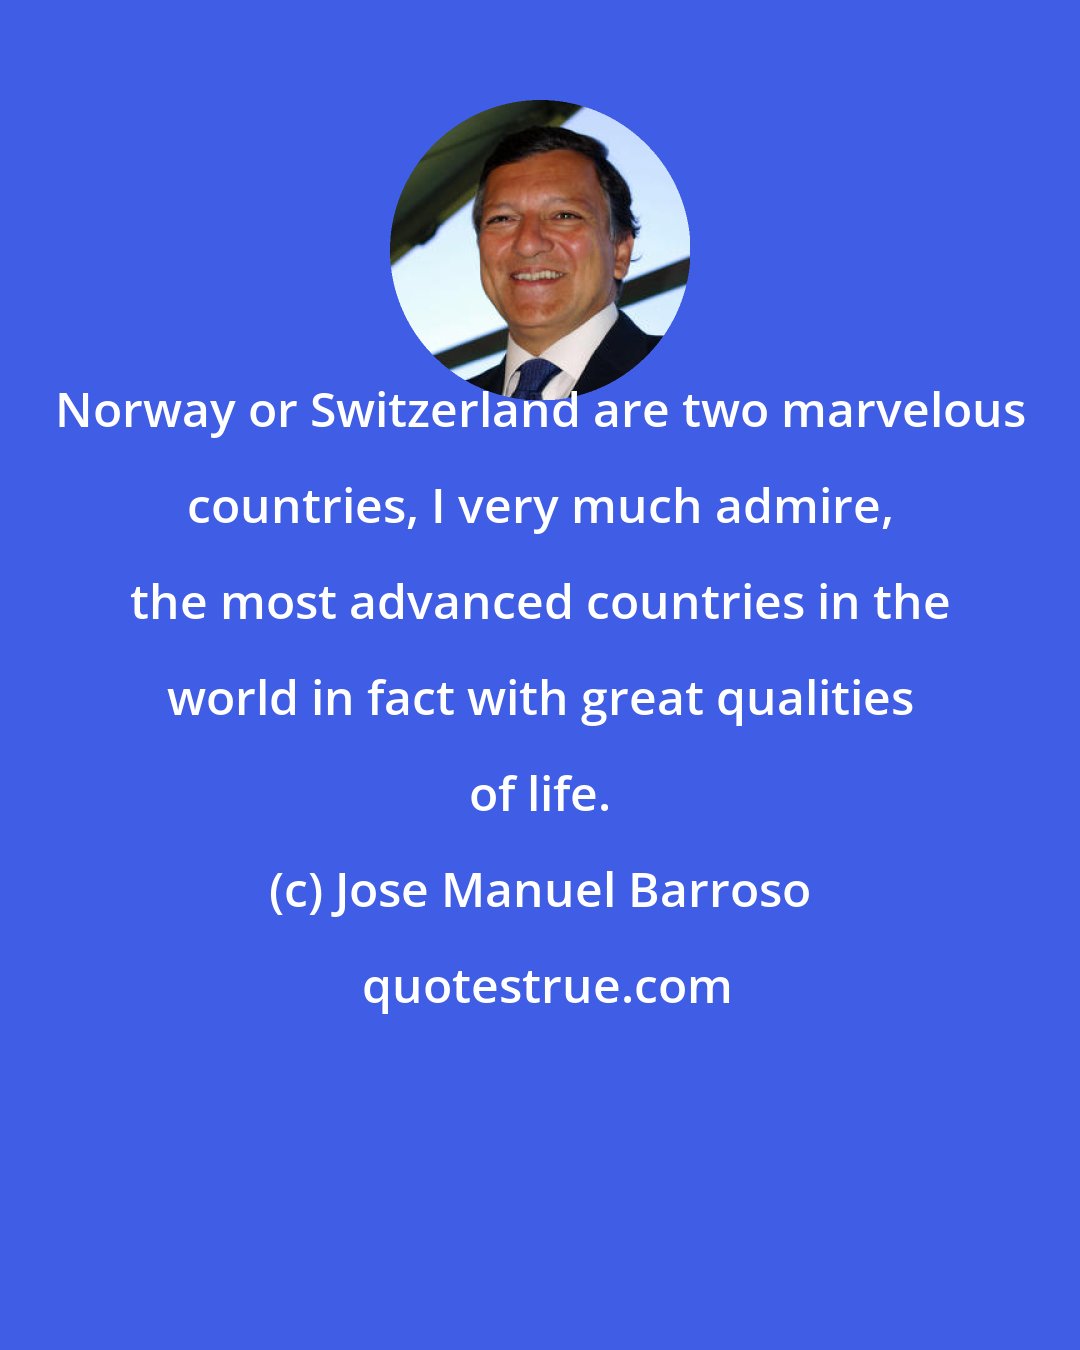 Jose Manuel Barroso: Norway or Switzerland are two marvelous countries, I very much admire, the most advanced countries in the world in fact with great qualities of life.